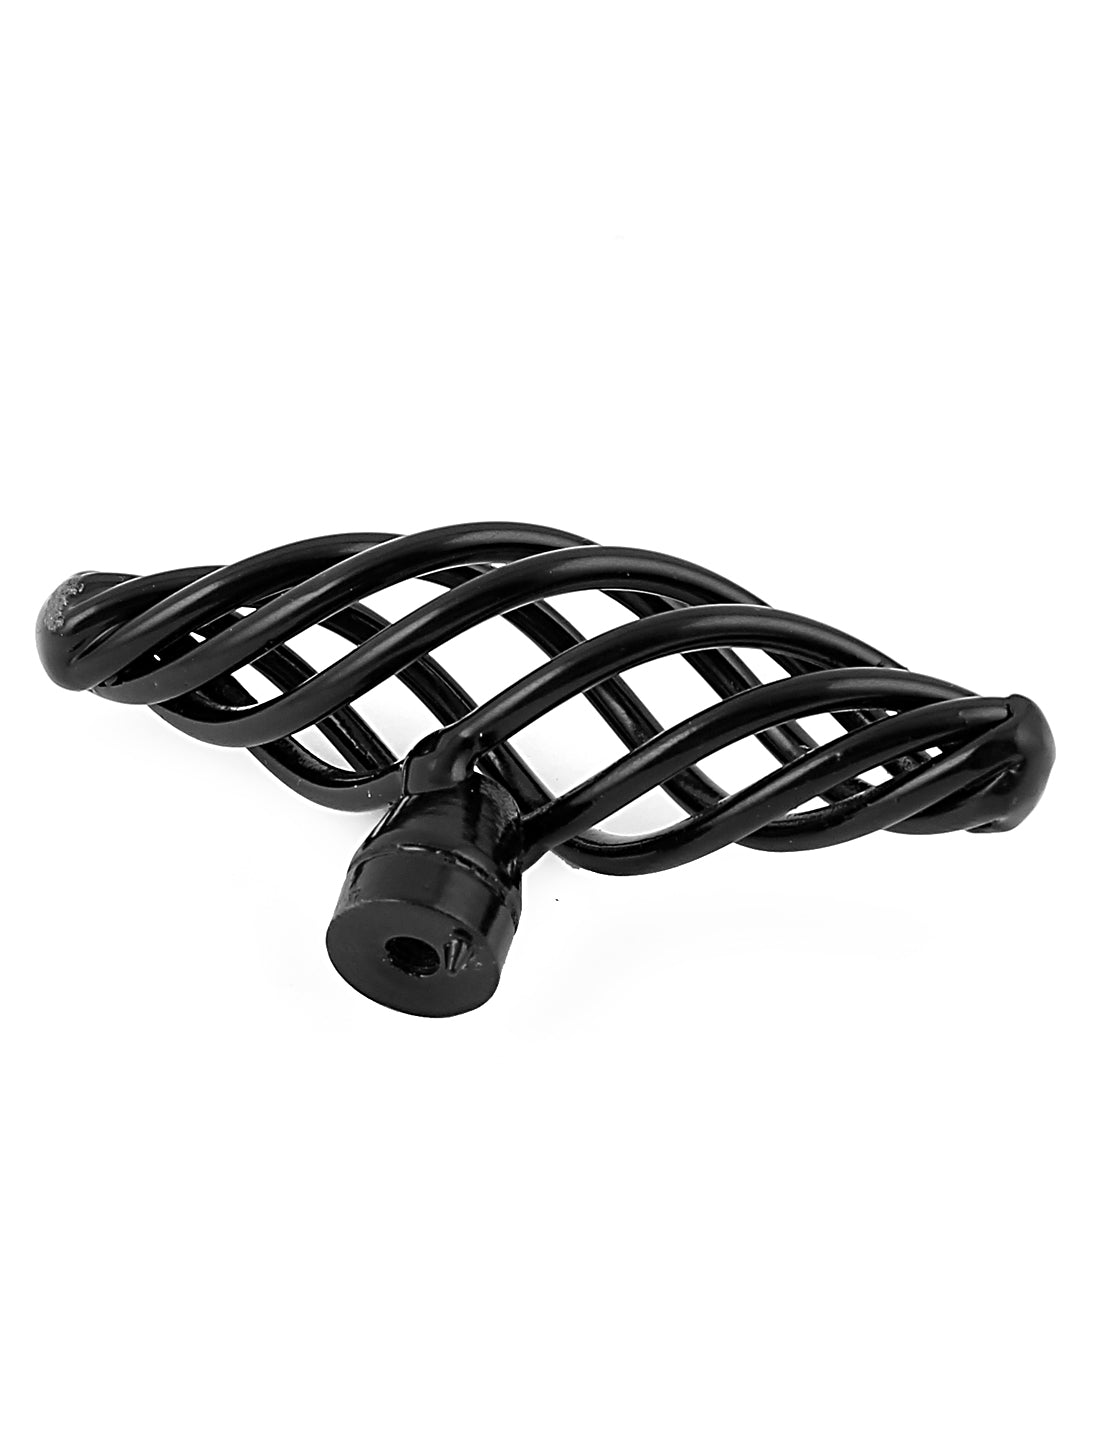 uxcell Uxcell 7.4cm Long Birdcage Knob Kitchen Cabinet Cupboard Closet Drawer Pull Handle Black